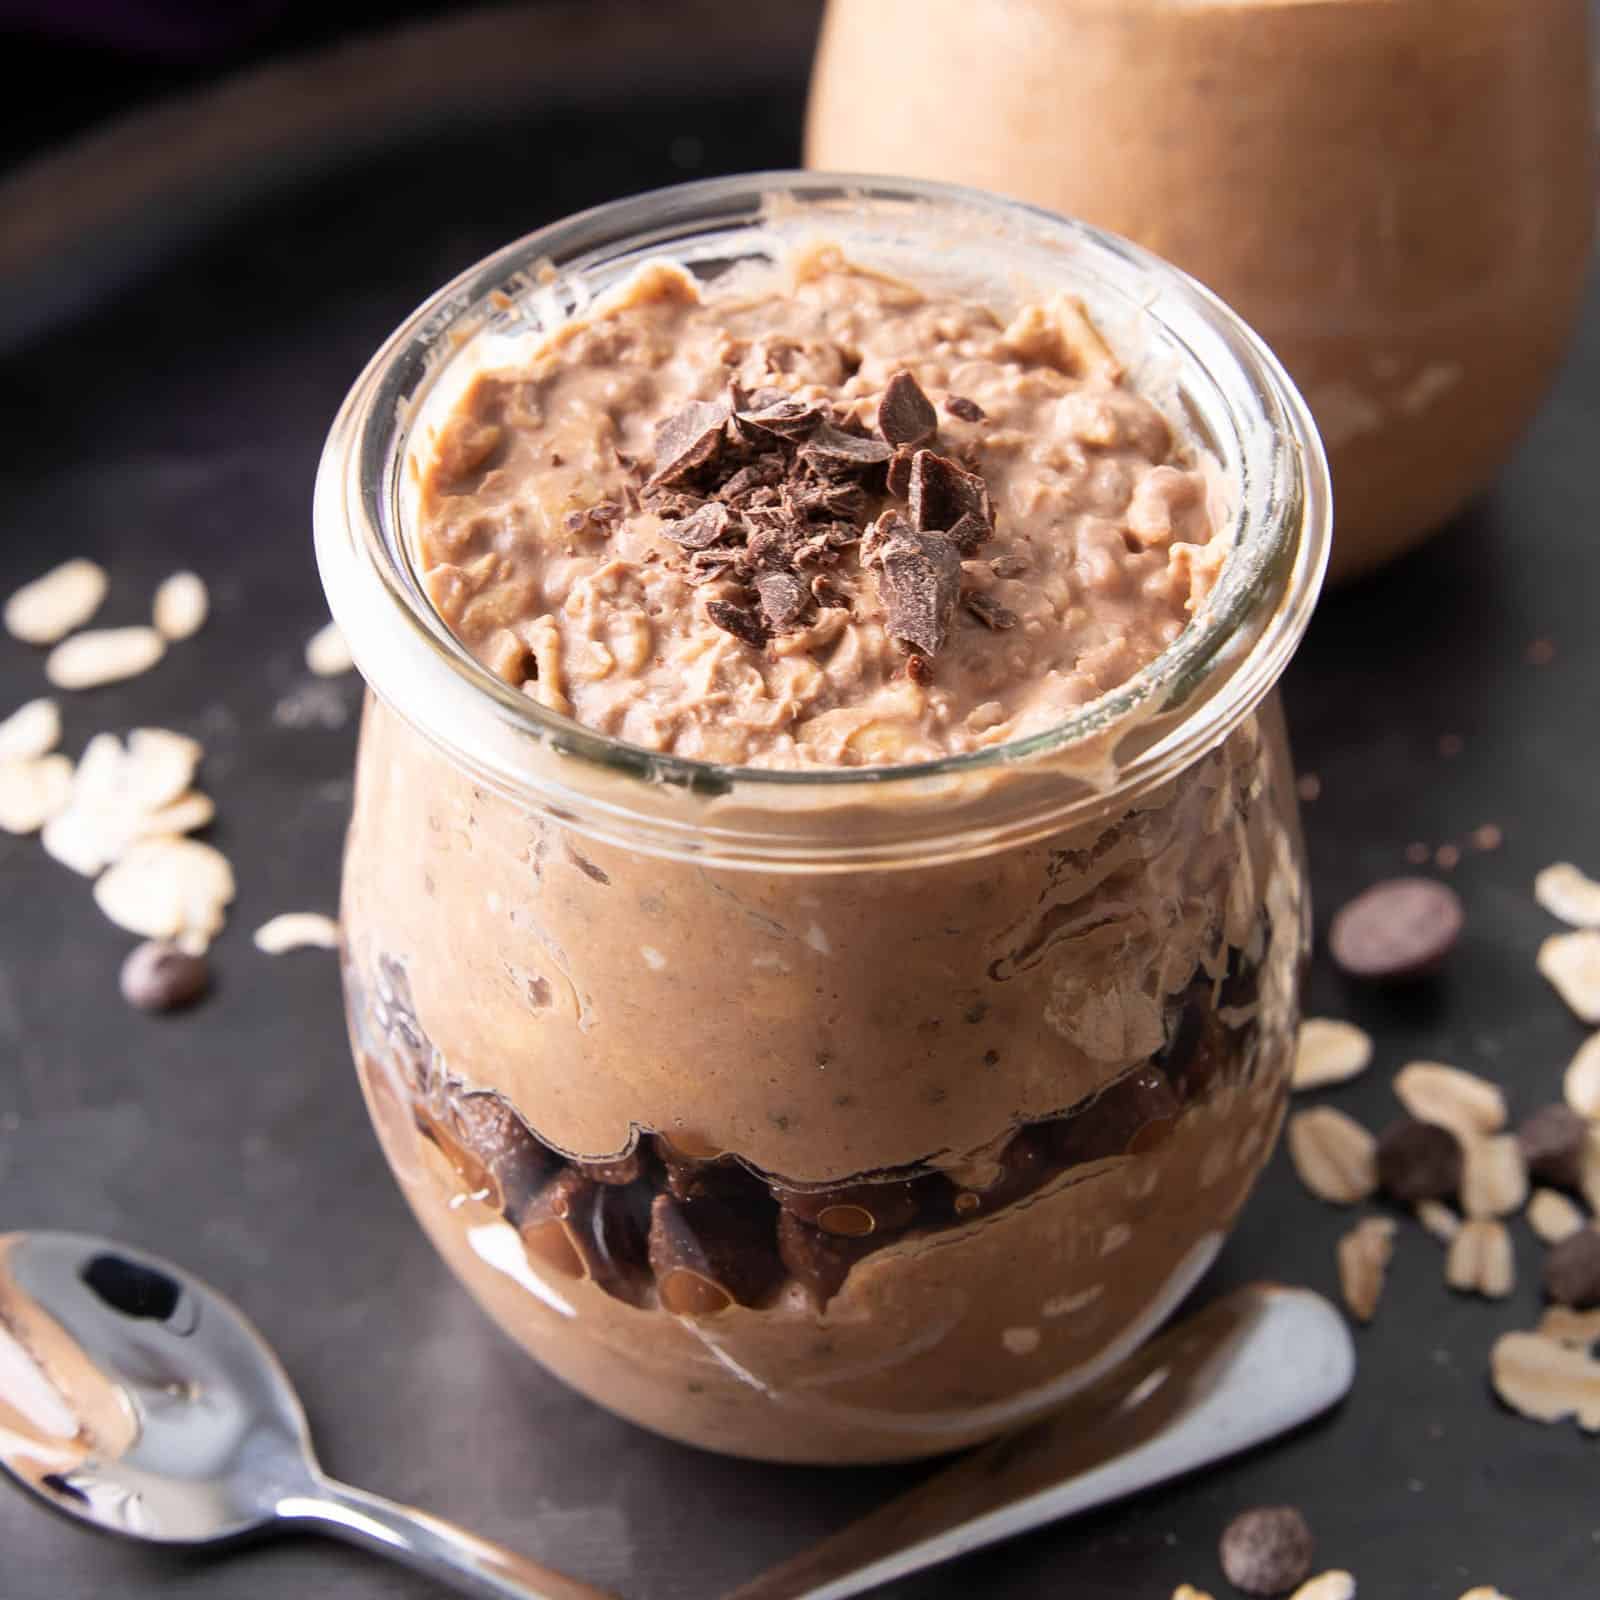 The first way to make overnight oats vegan: chocolate overnight oats.